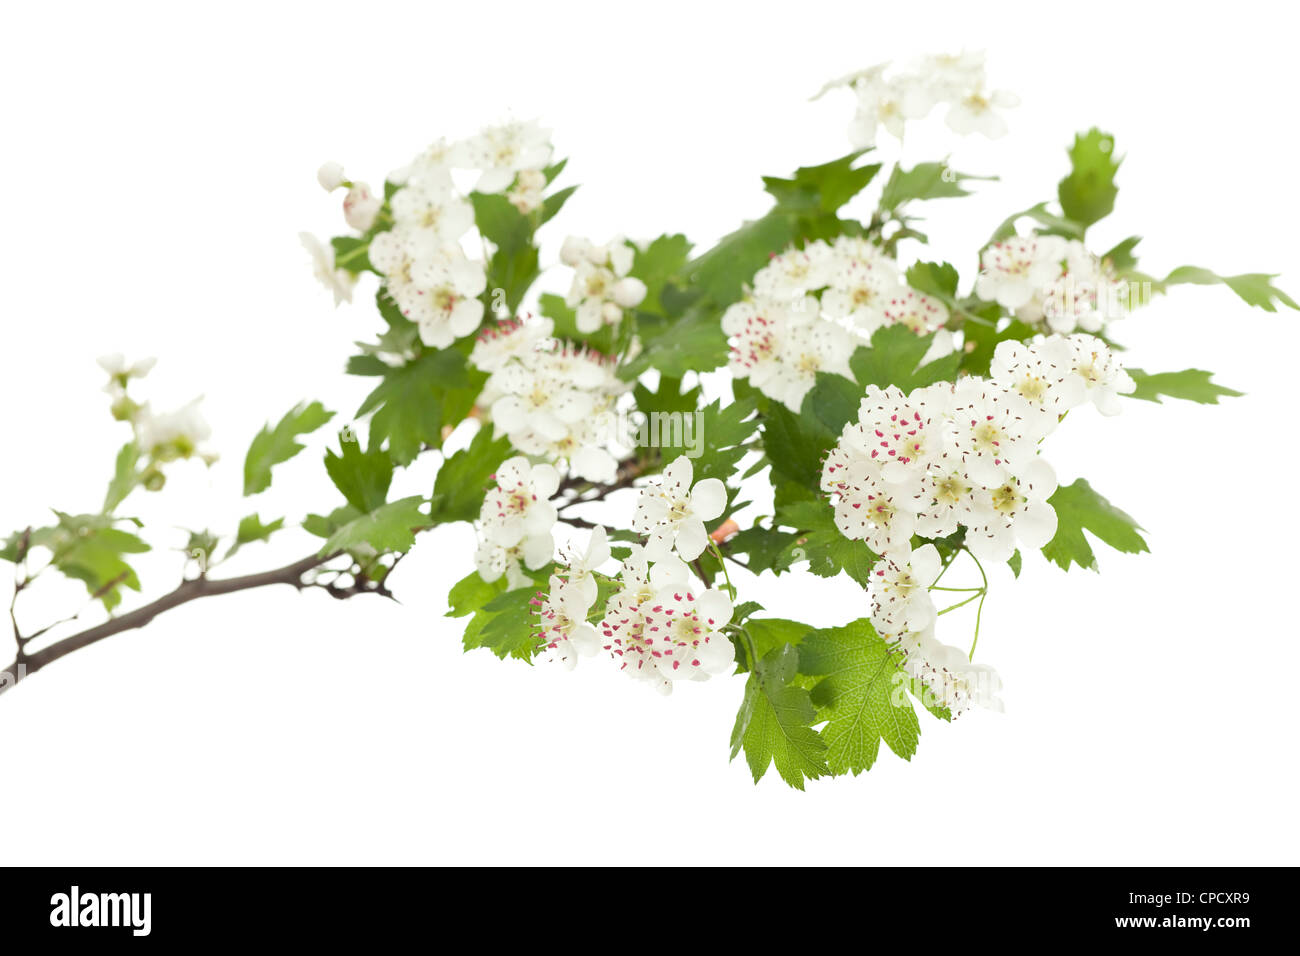 hawthorn branch with flowers on white background Stock Photo